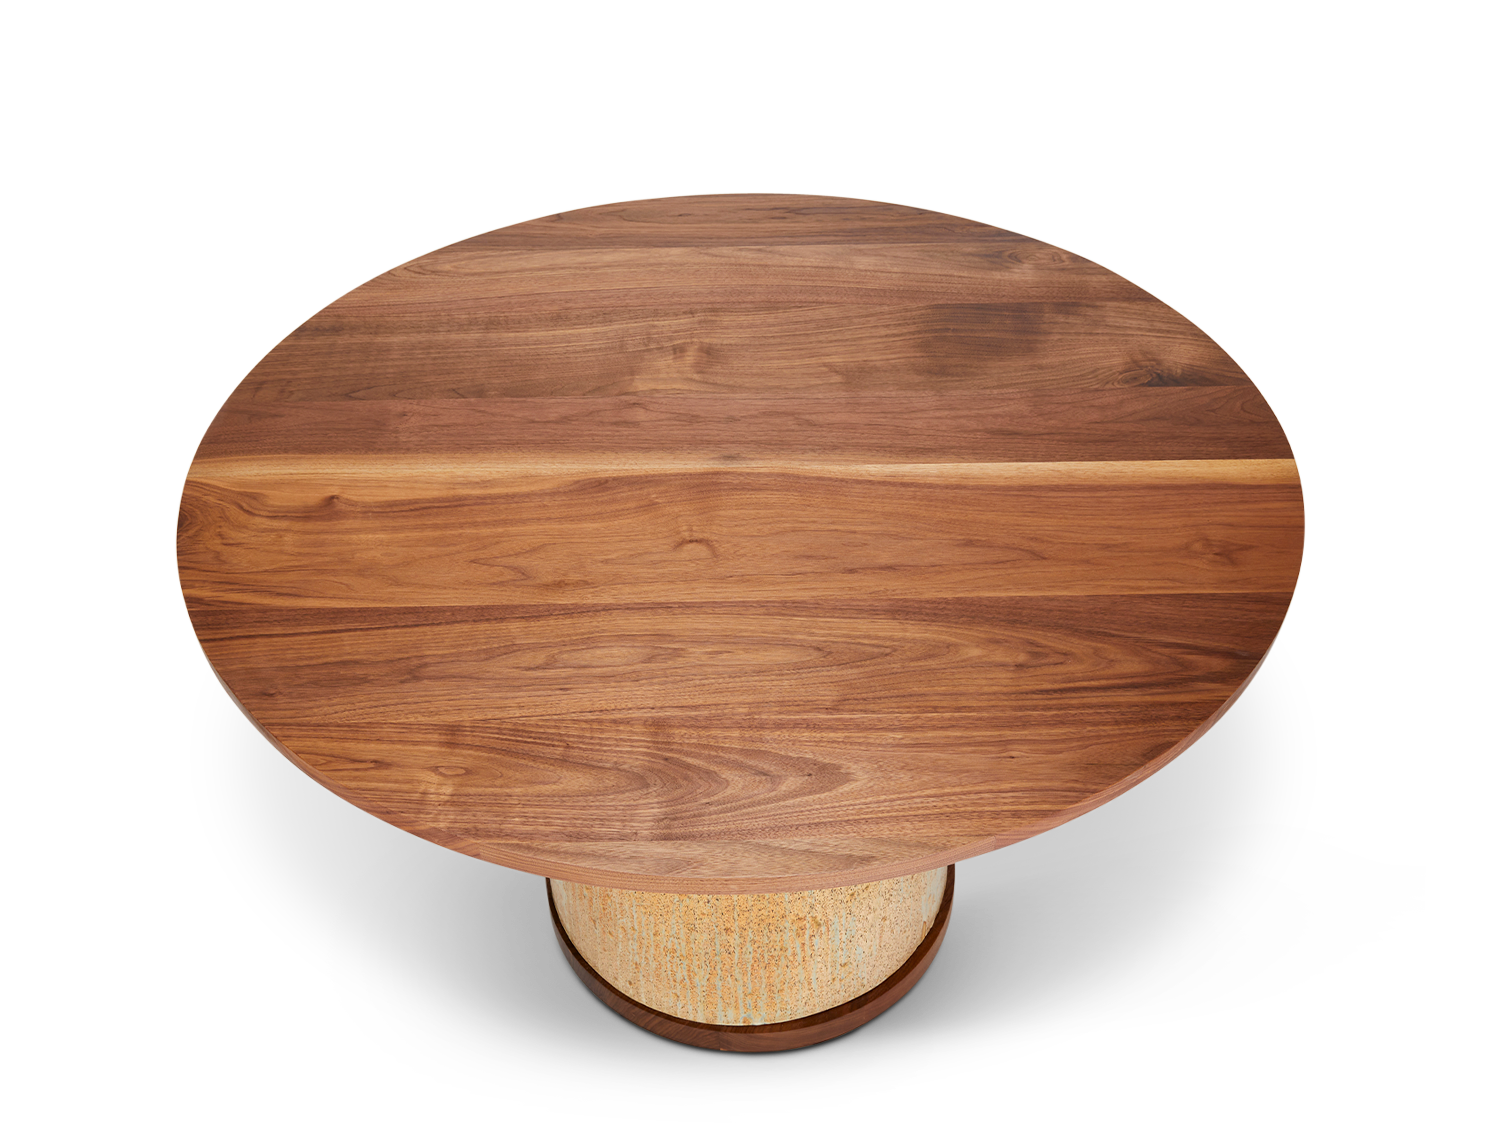 Desert Sunset Dining Room Table with Wood Top